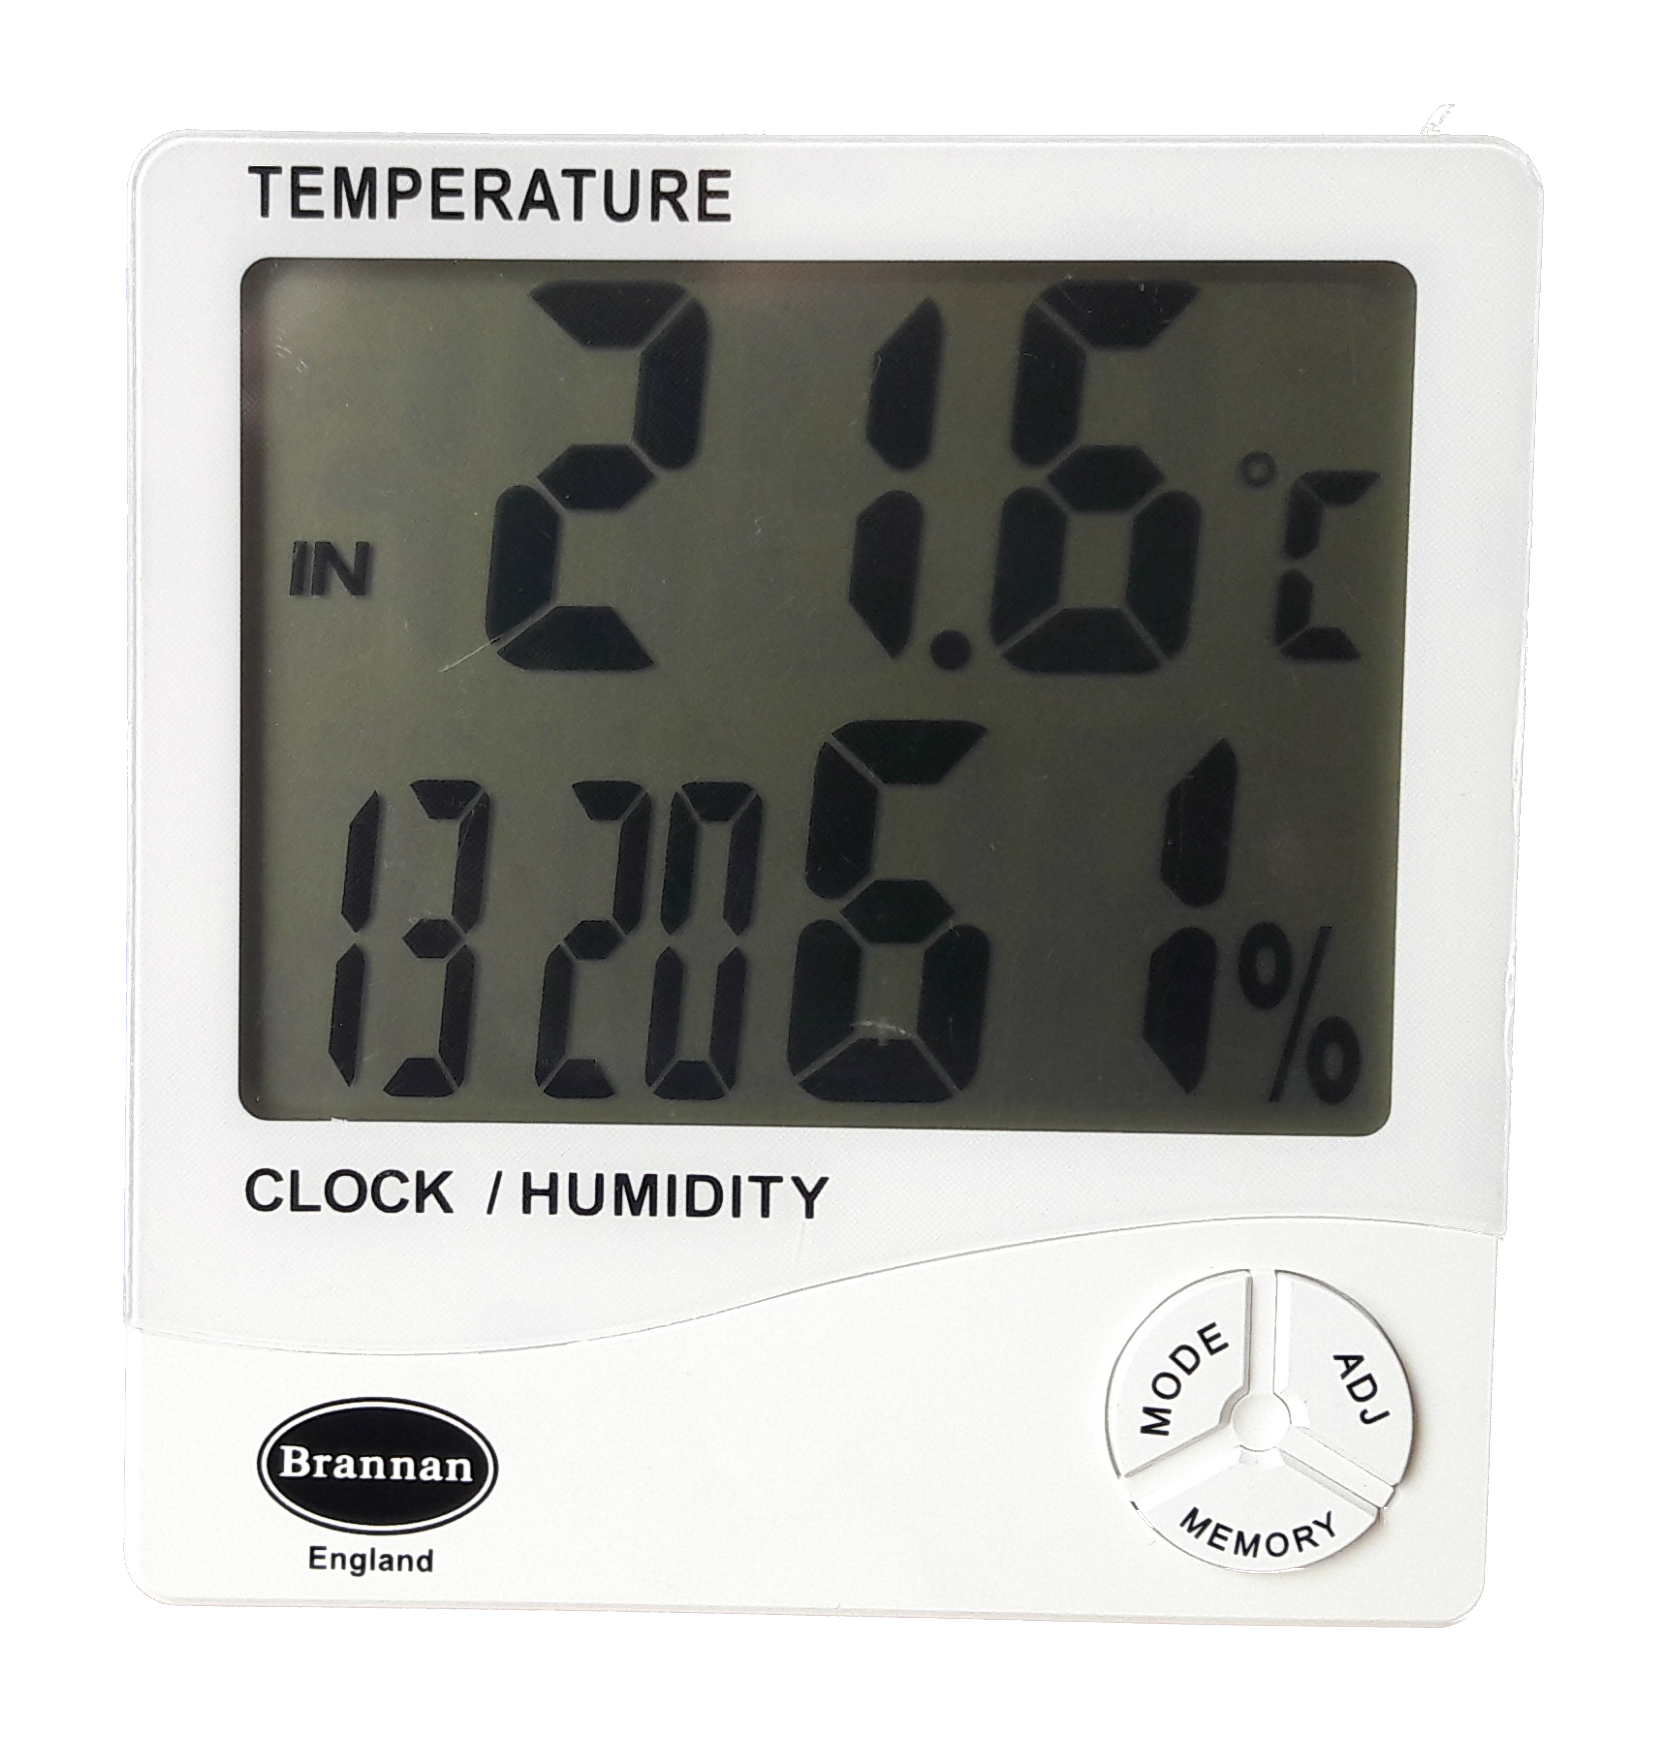 Temperature and Humidity Monitor for Cleanroom: Is It Accurate?